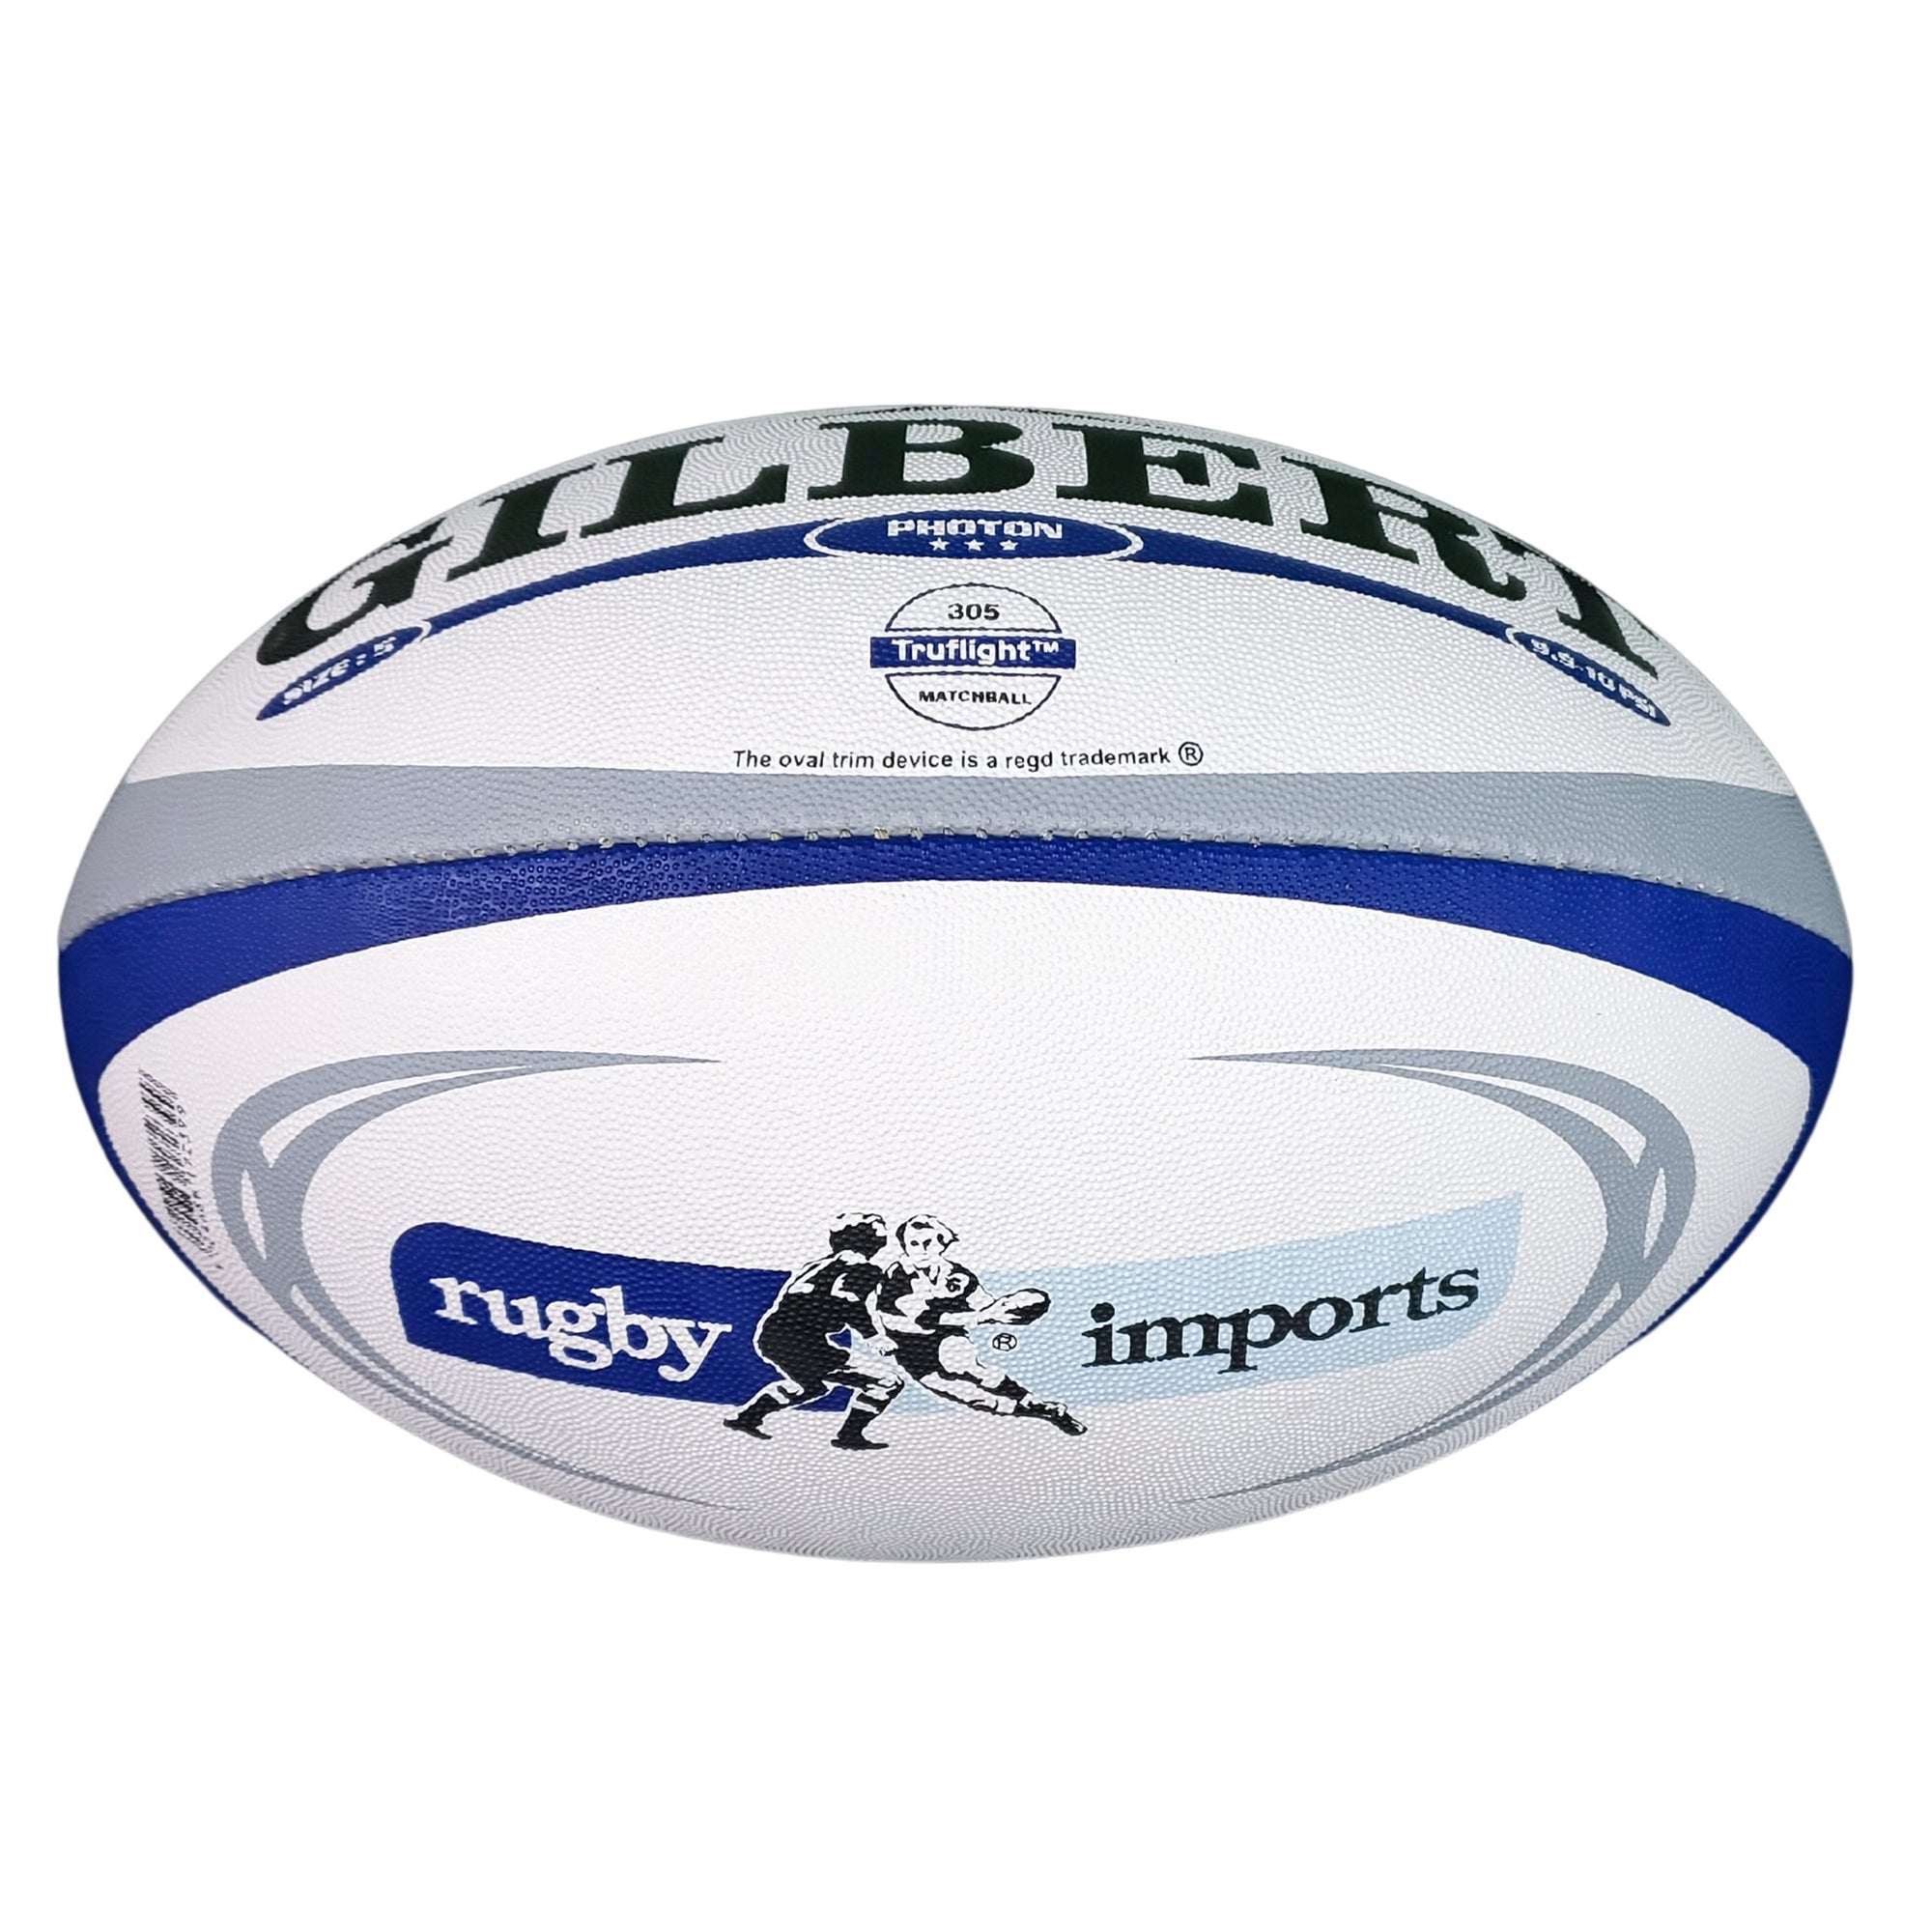 Rugby Imports Gilbert Rugby Imports Photon Match Ball